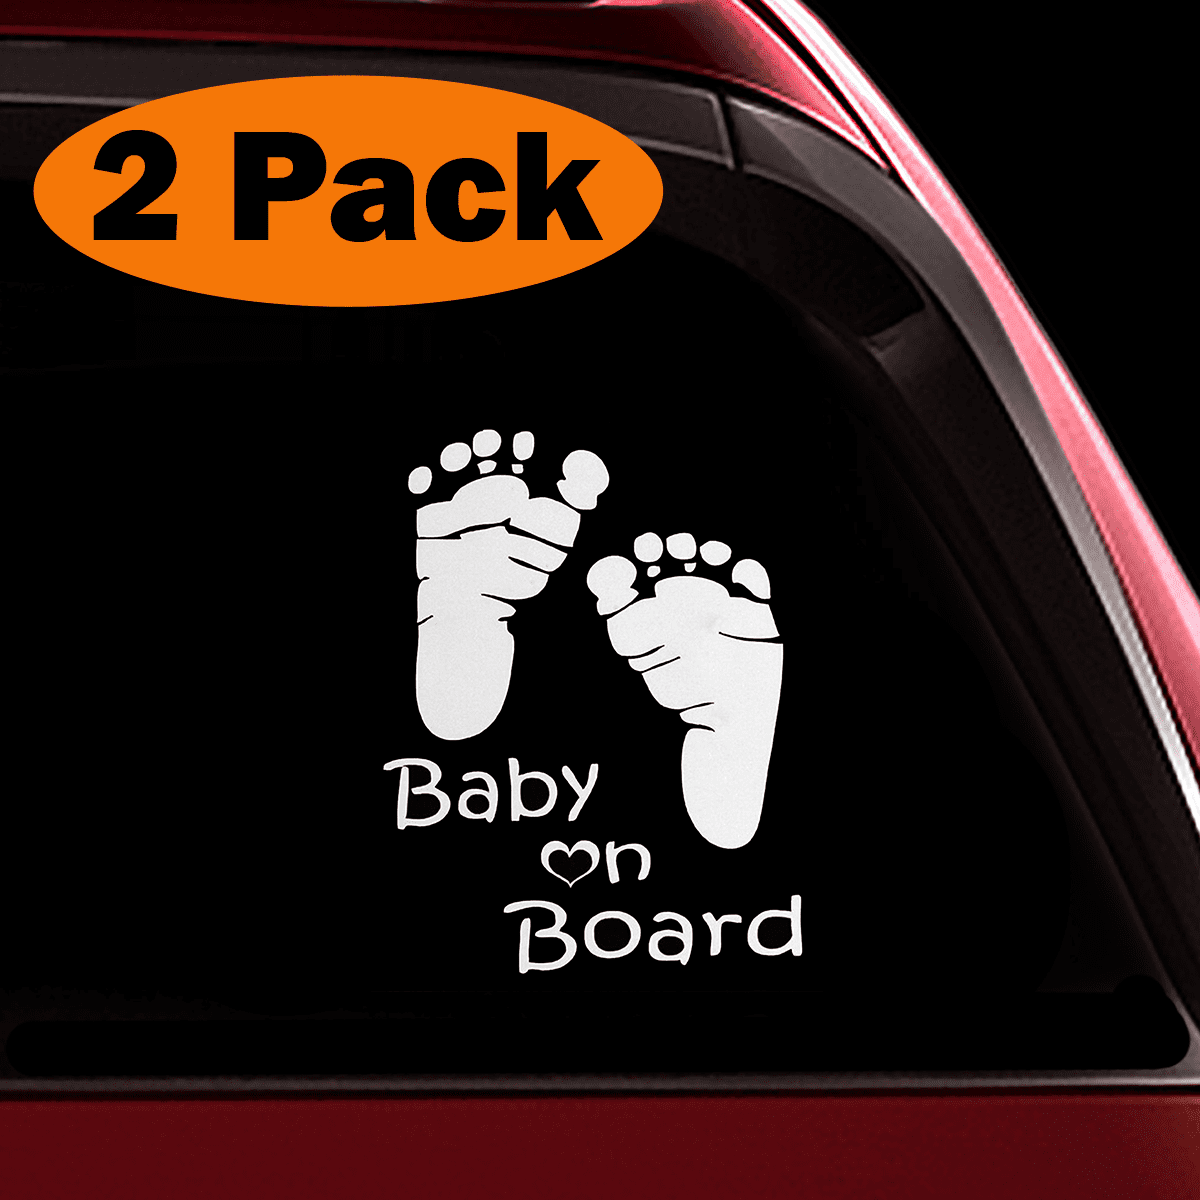 Lot of 4 Yellow Reflective Baby On Board Car Window Suction Cup Warning Sign 